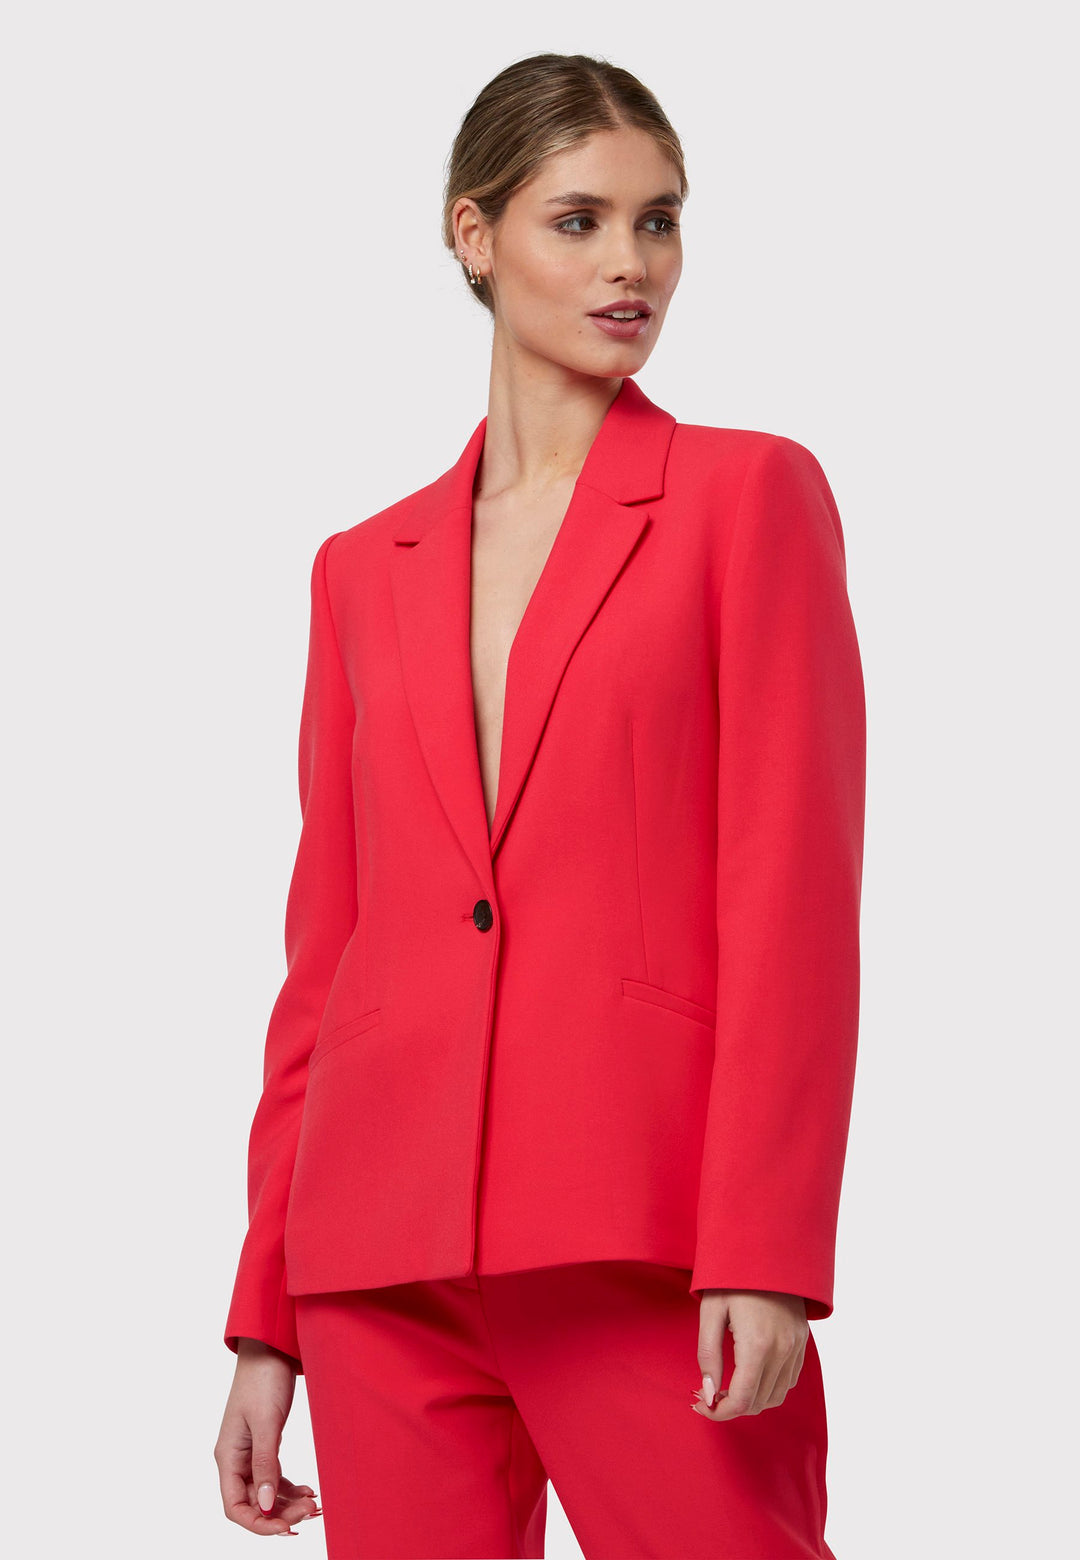 Add a contemporary edge to your wardrobe with the Marlowe Jacket, rendered in a striking begonia. This modern piece features a sleek collar and revere a singular button fastening. For a statement monochrome look pair with the matching Georgiana Trouser and Stella Begonia top to achieve a look that seamlessly blends sophistication with a bold, fashion-forward aesthetic.